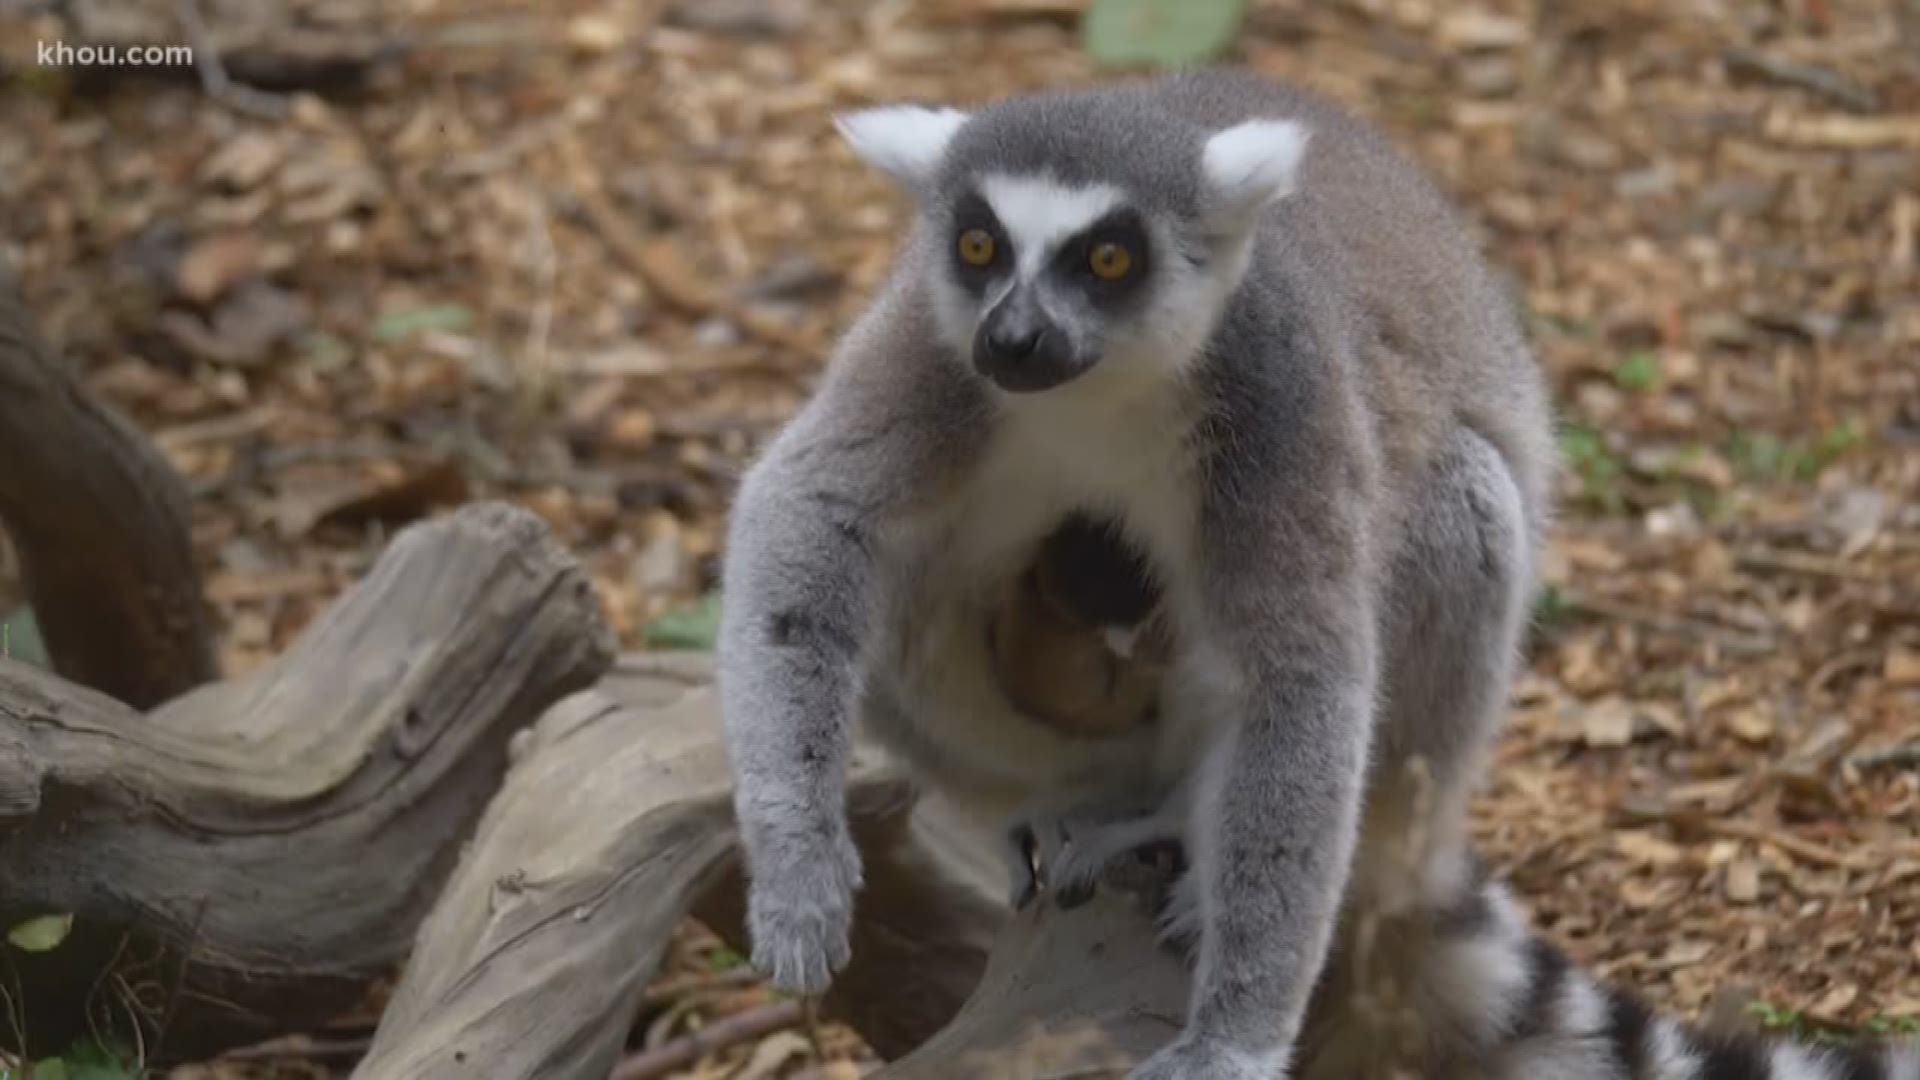 Oh baby! The Houston Zoo just welcomes two new little lemur babies. Last week, a ring-tailed lemur mama gave birth to a tiny little baby weighing in at just three ounces.